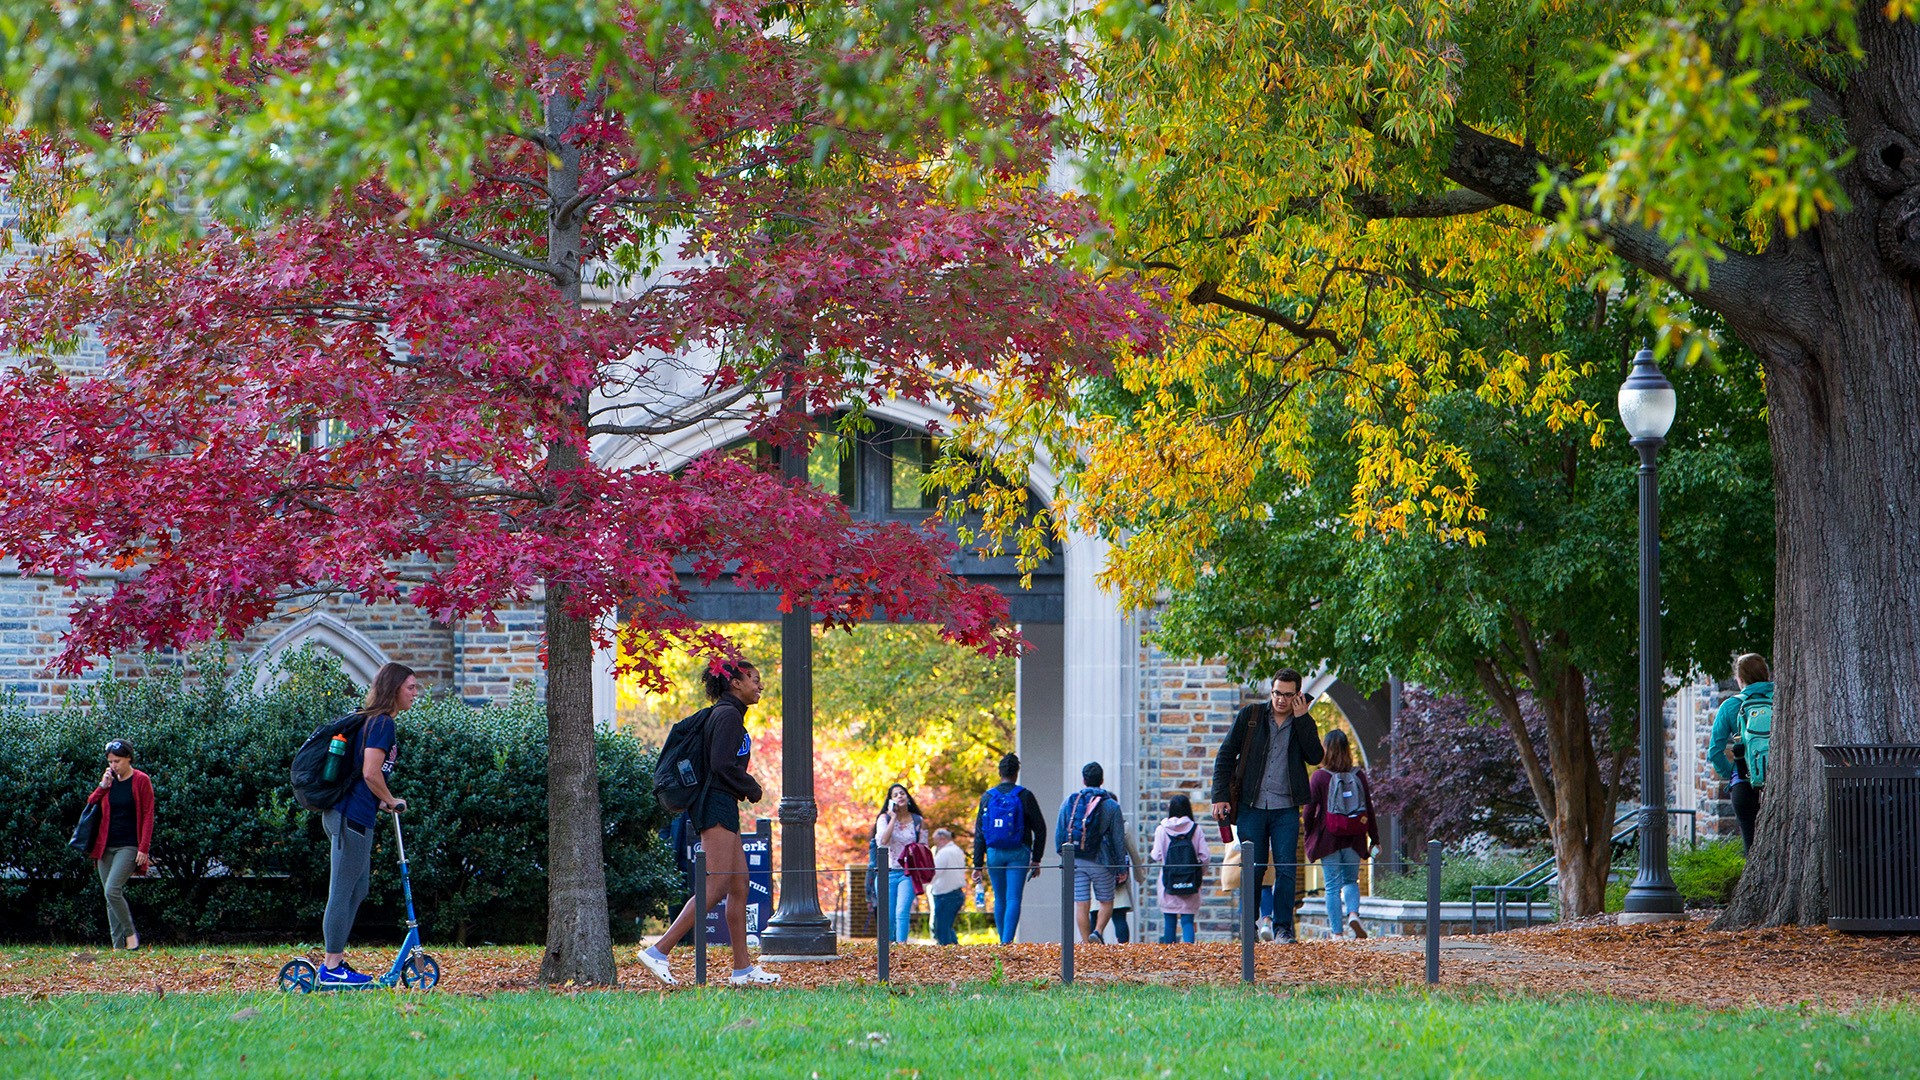 Fall season on campus. Leaves with red, yellow, and green still on trees and students walking through fallen leaves.